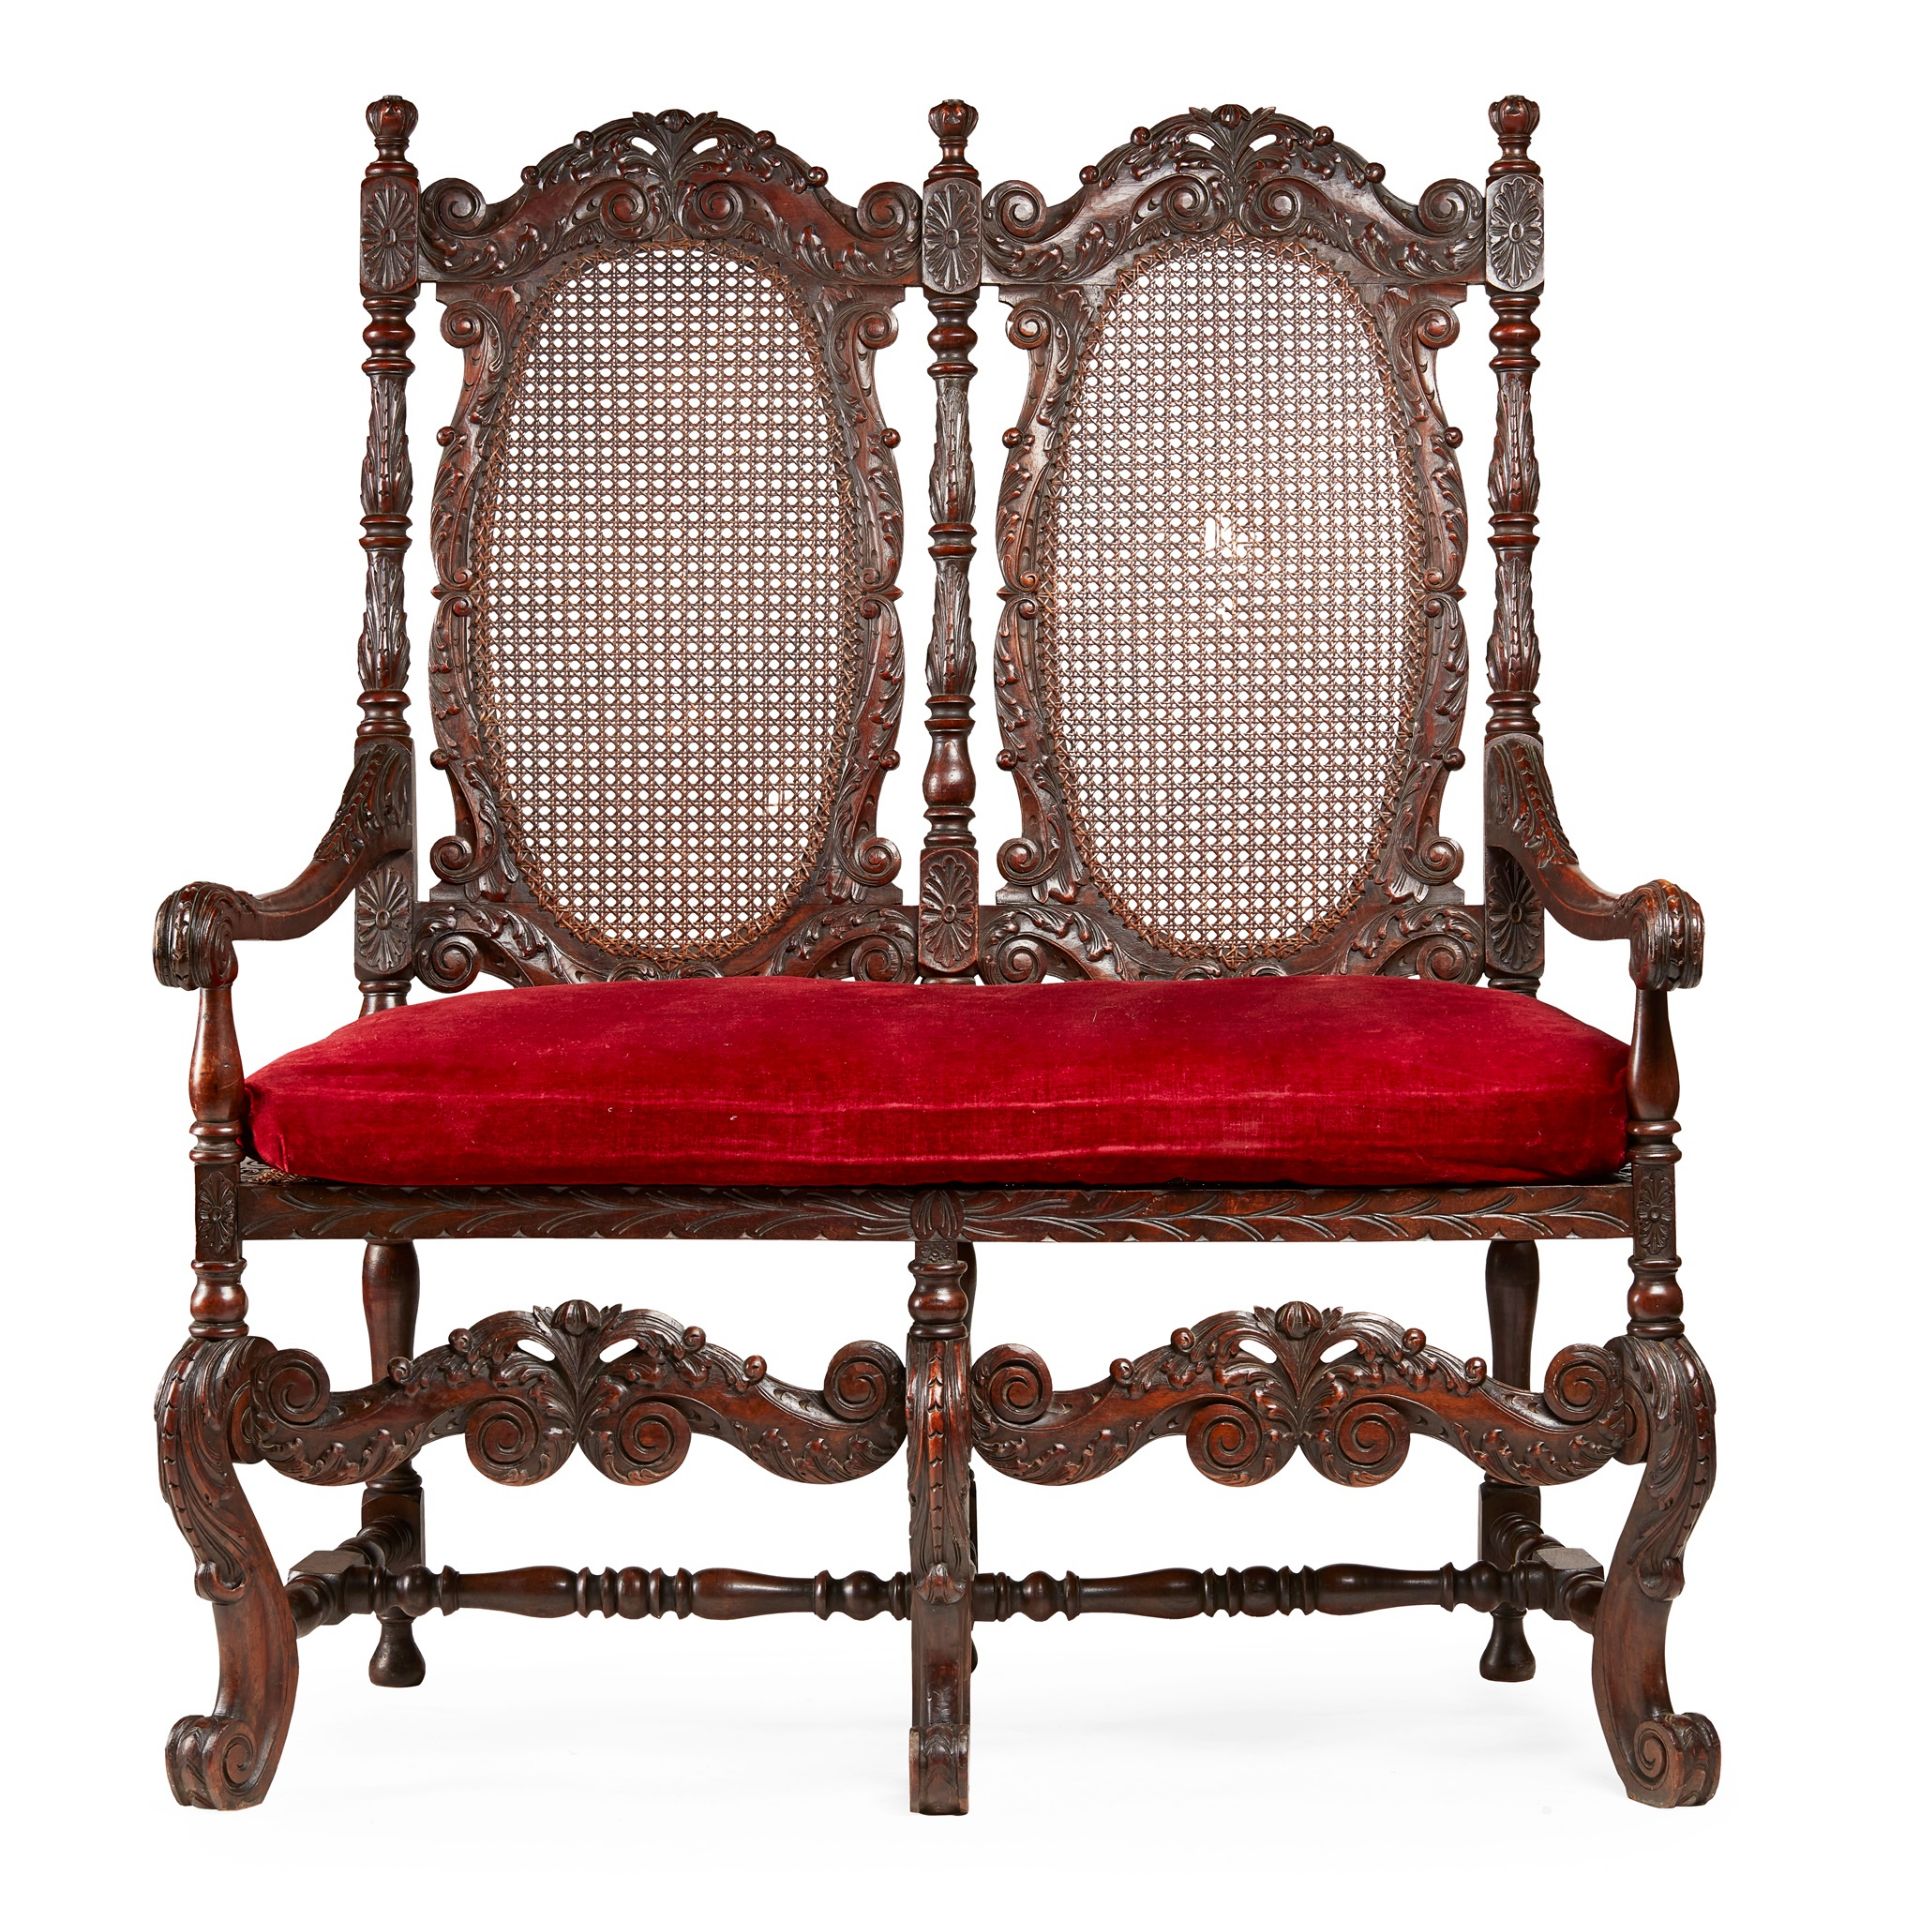 WILLIAM AND MARY STYLE WALNUT AND CANED HALL SEAT 19TH CENTURY - Image 2 of 2